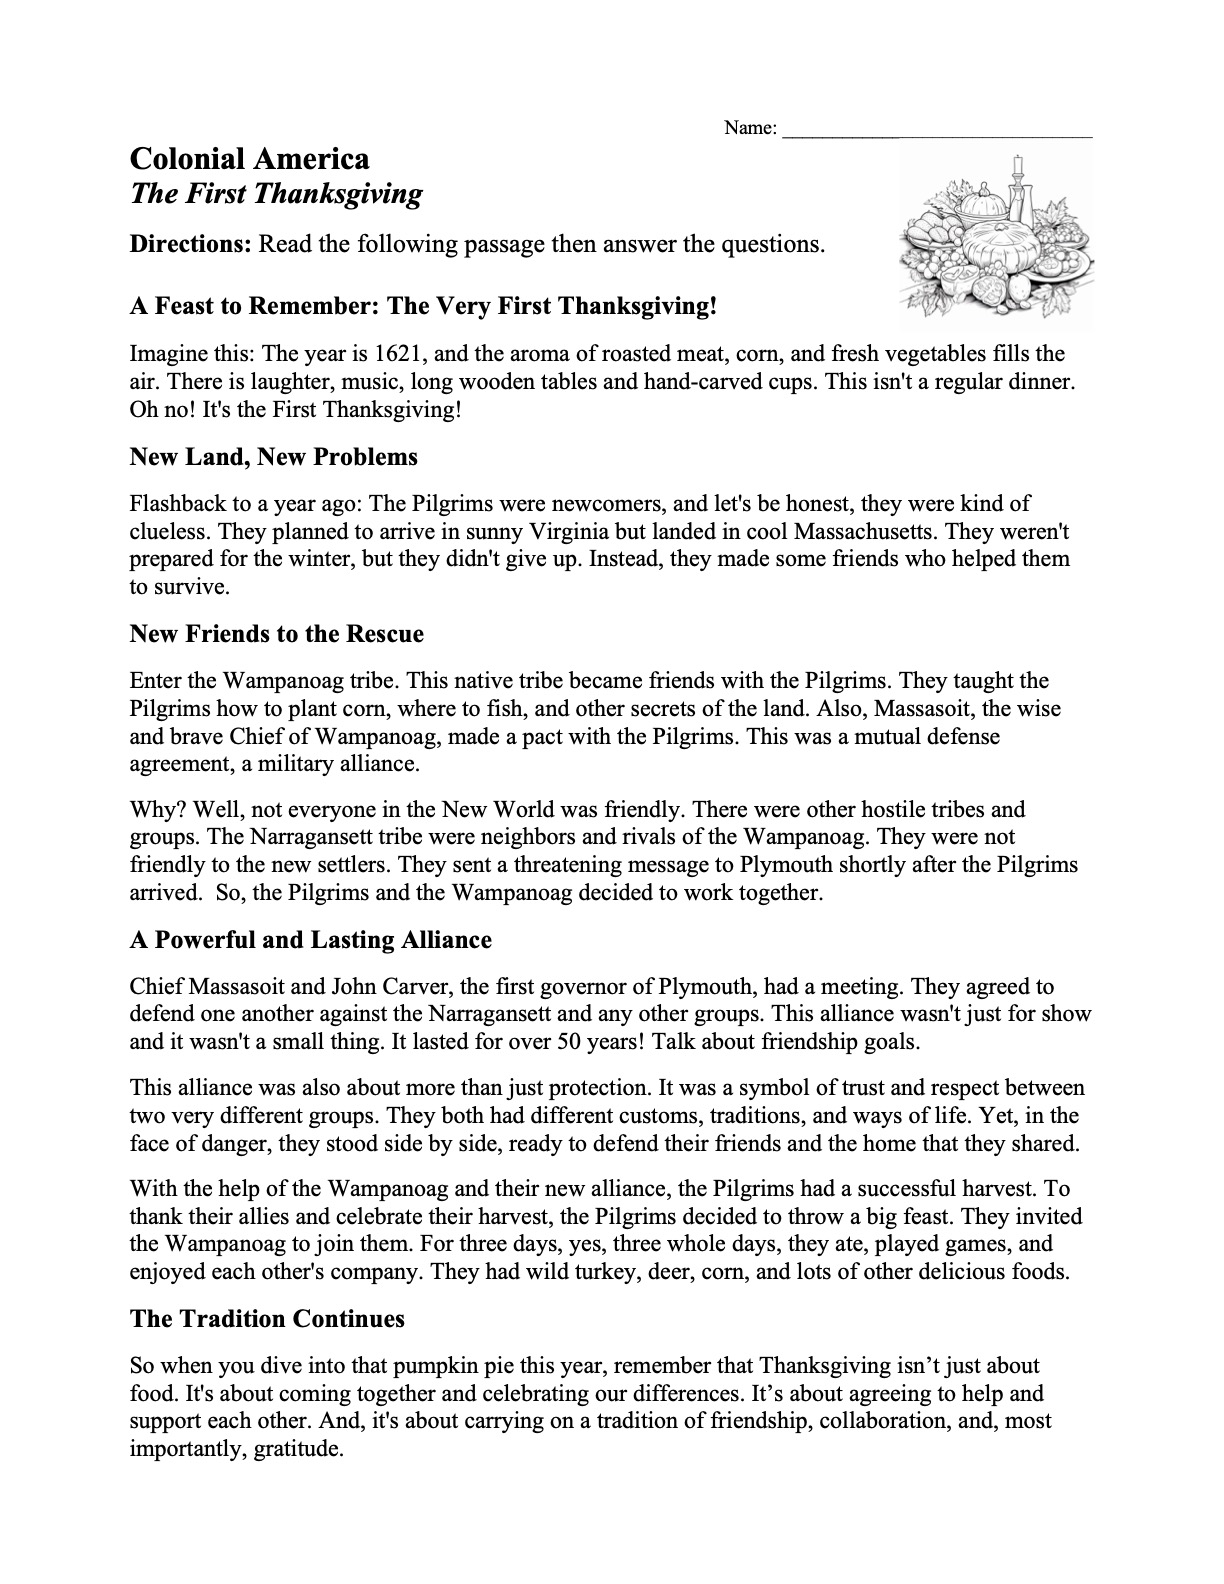 This is a preview image of our The First Thanksgiving Worksheet. Click on it to enlarge this image and view the source file.